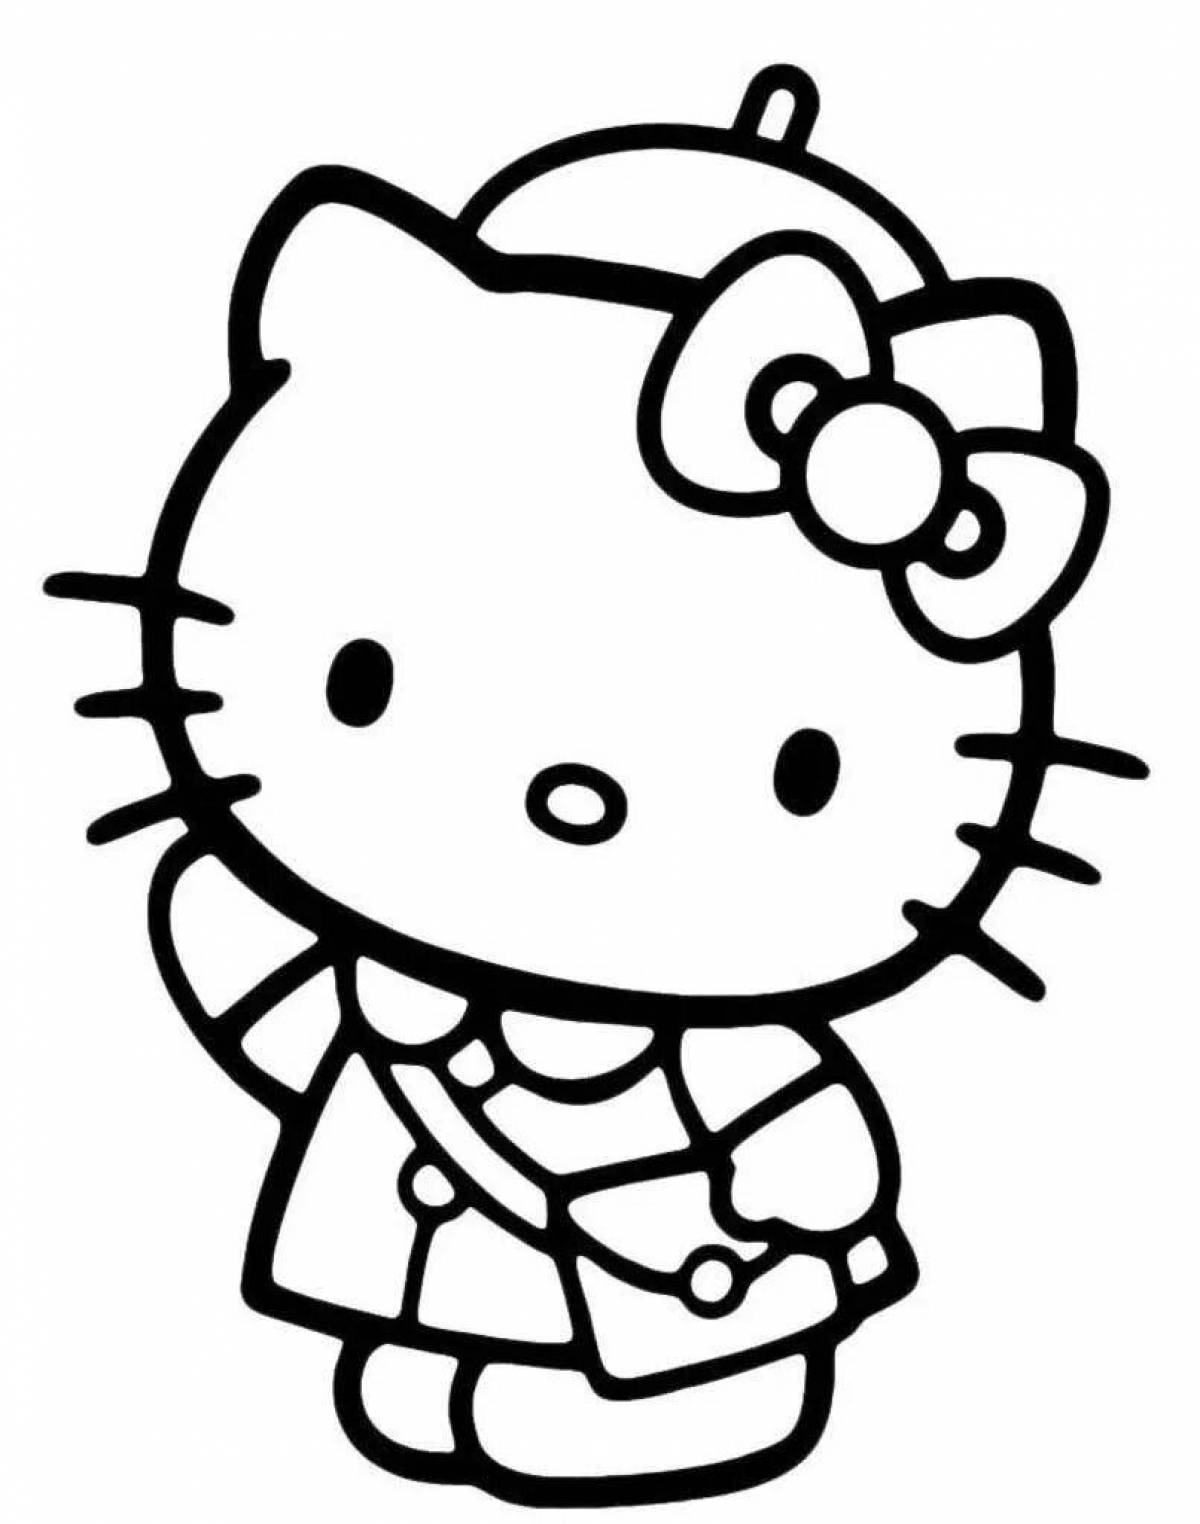 Joy hello kitty colorful coloring game